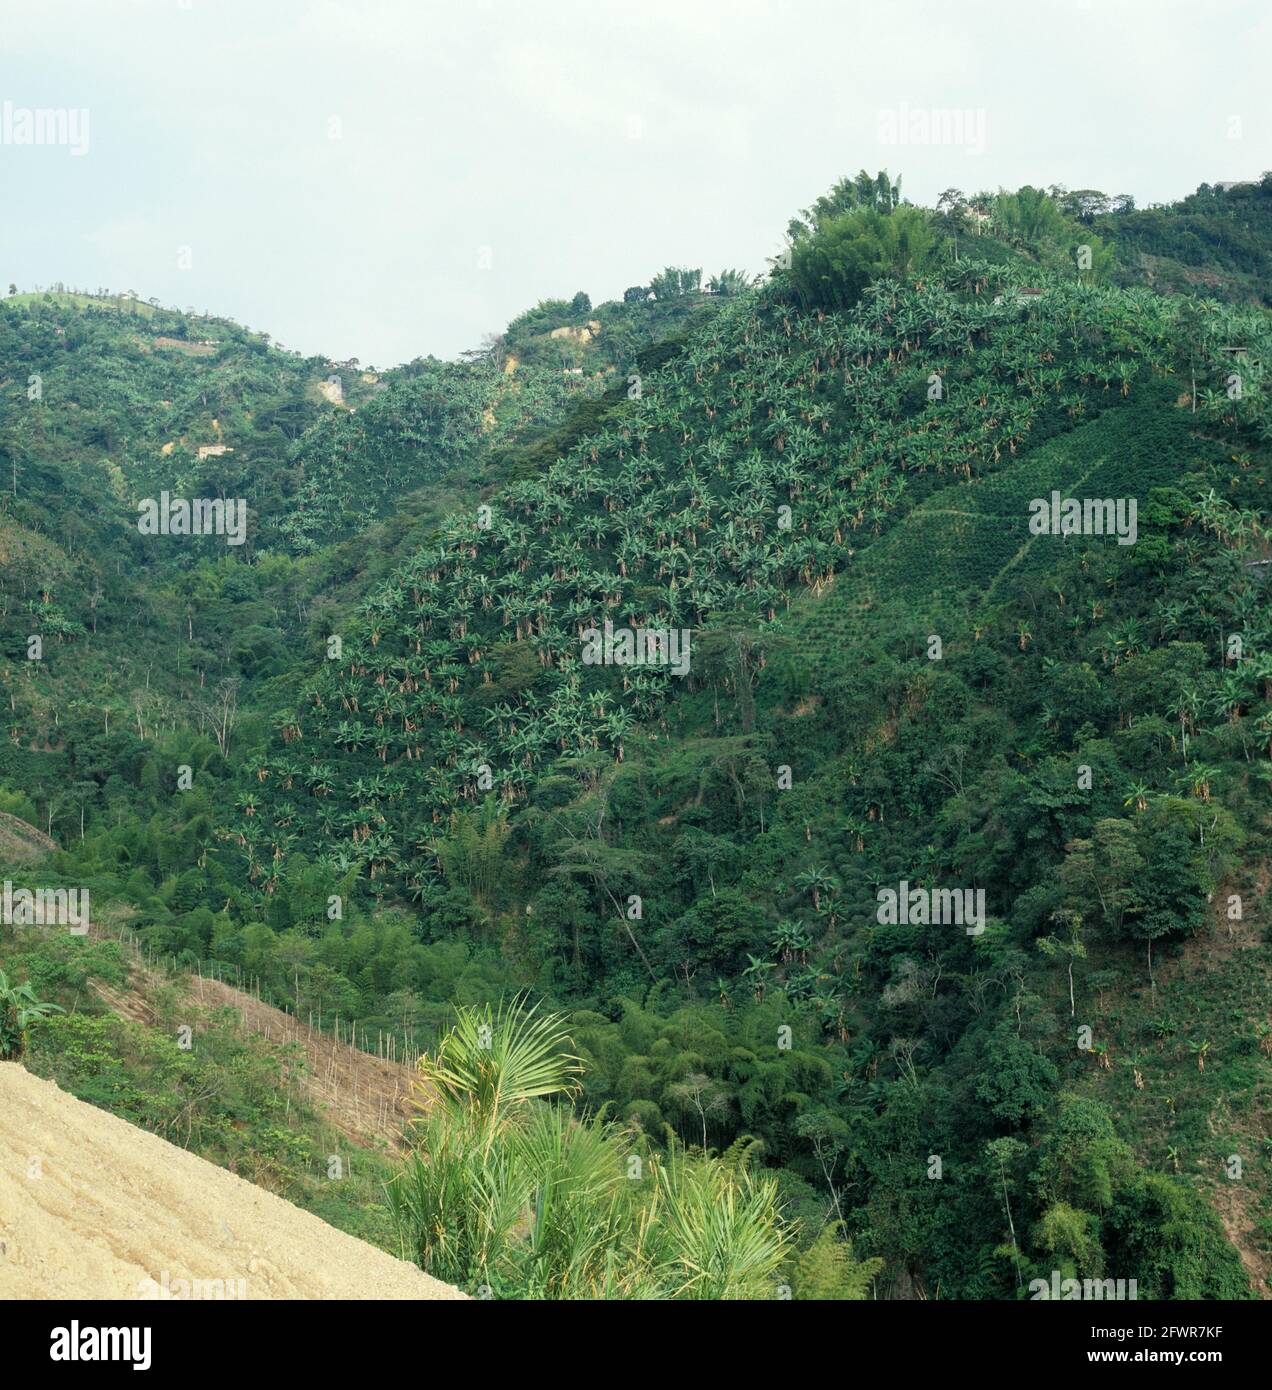 Coffee (Coffea arabica) plantation, some under banana or legume shade trees on the hillsides near Manizales, Colombia Stock Photo